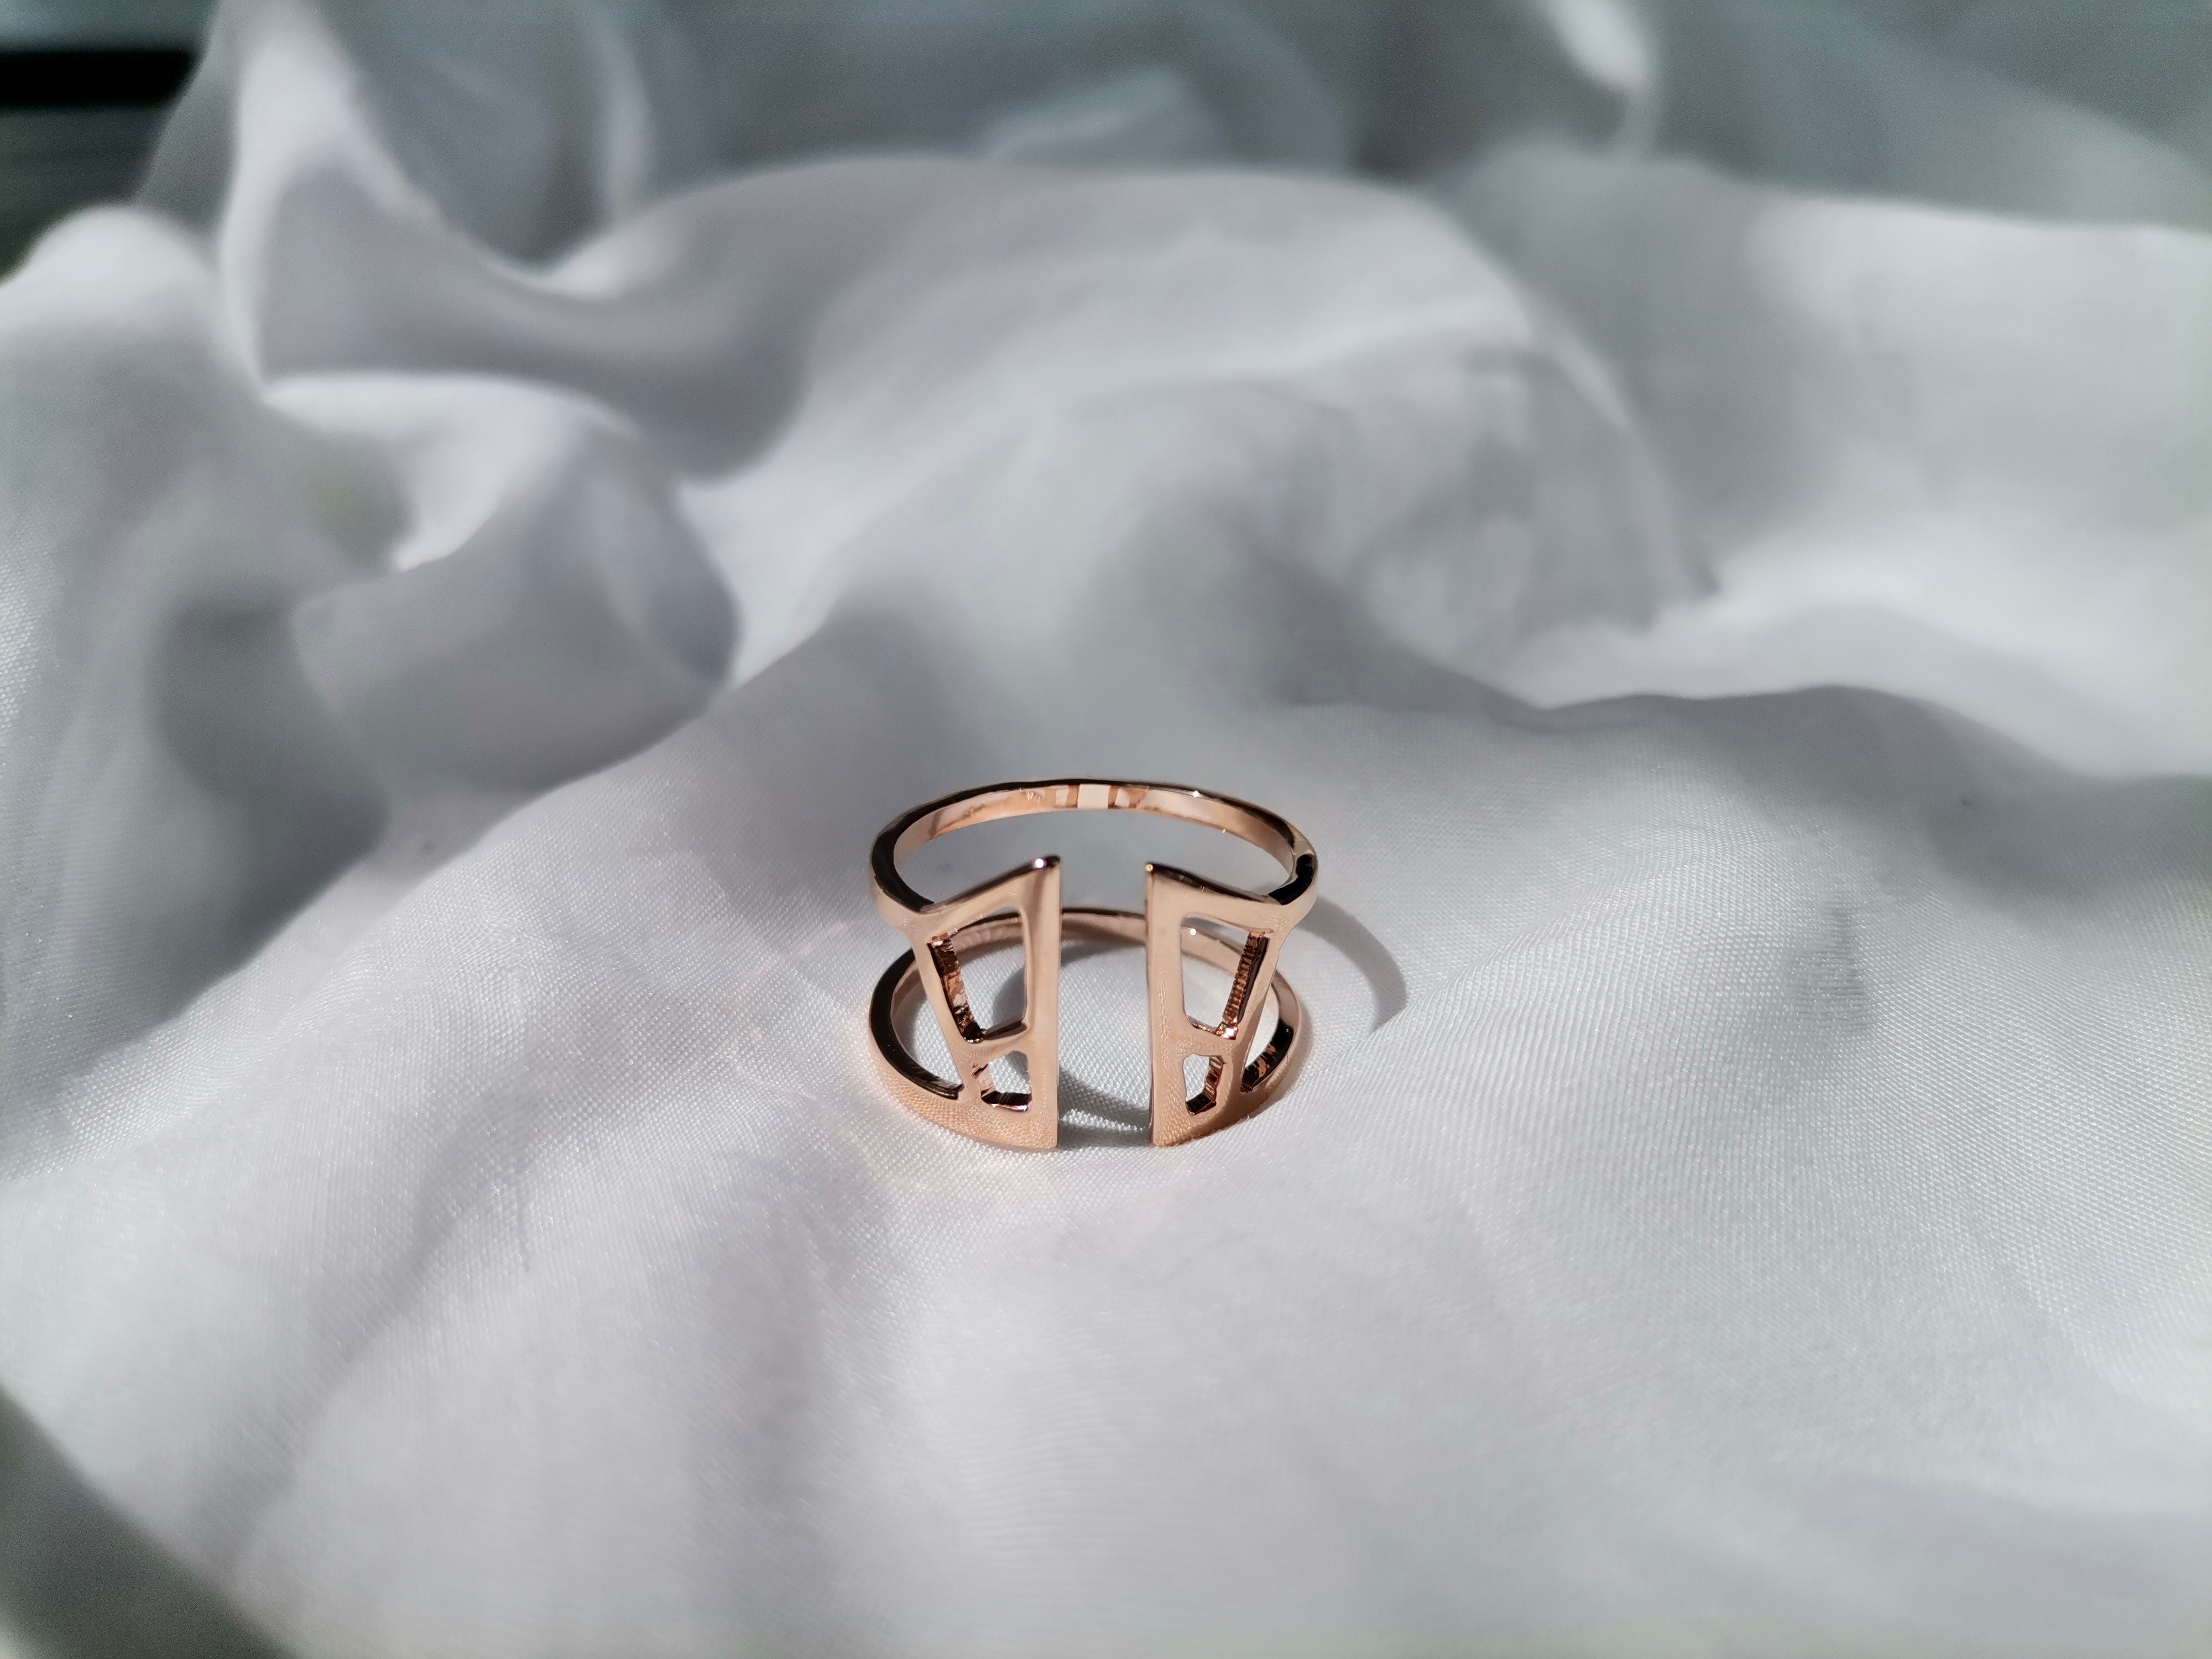 rose gold stylish sustainable jewelry unisex recycled materials